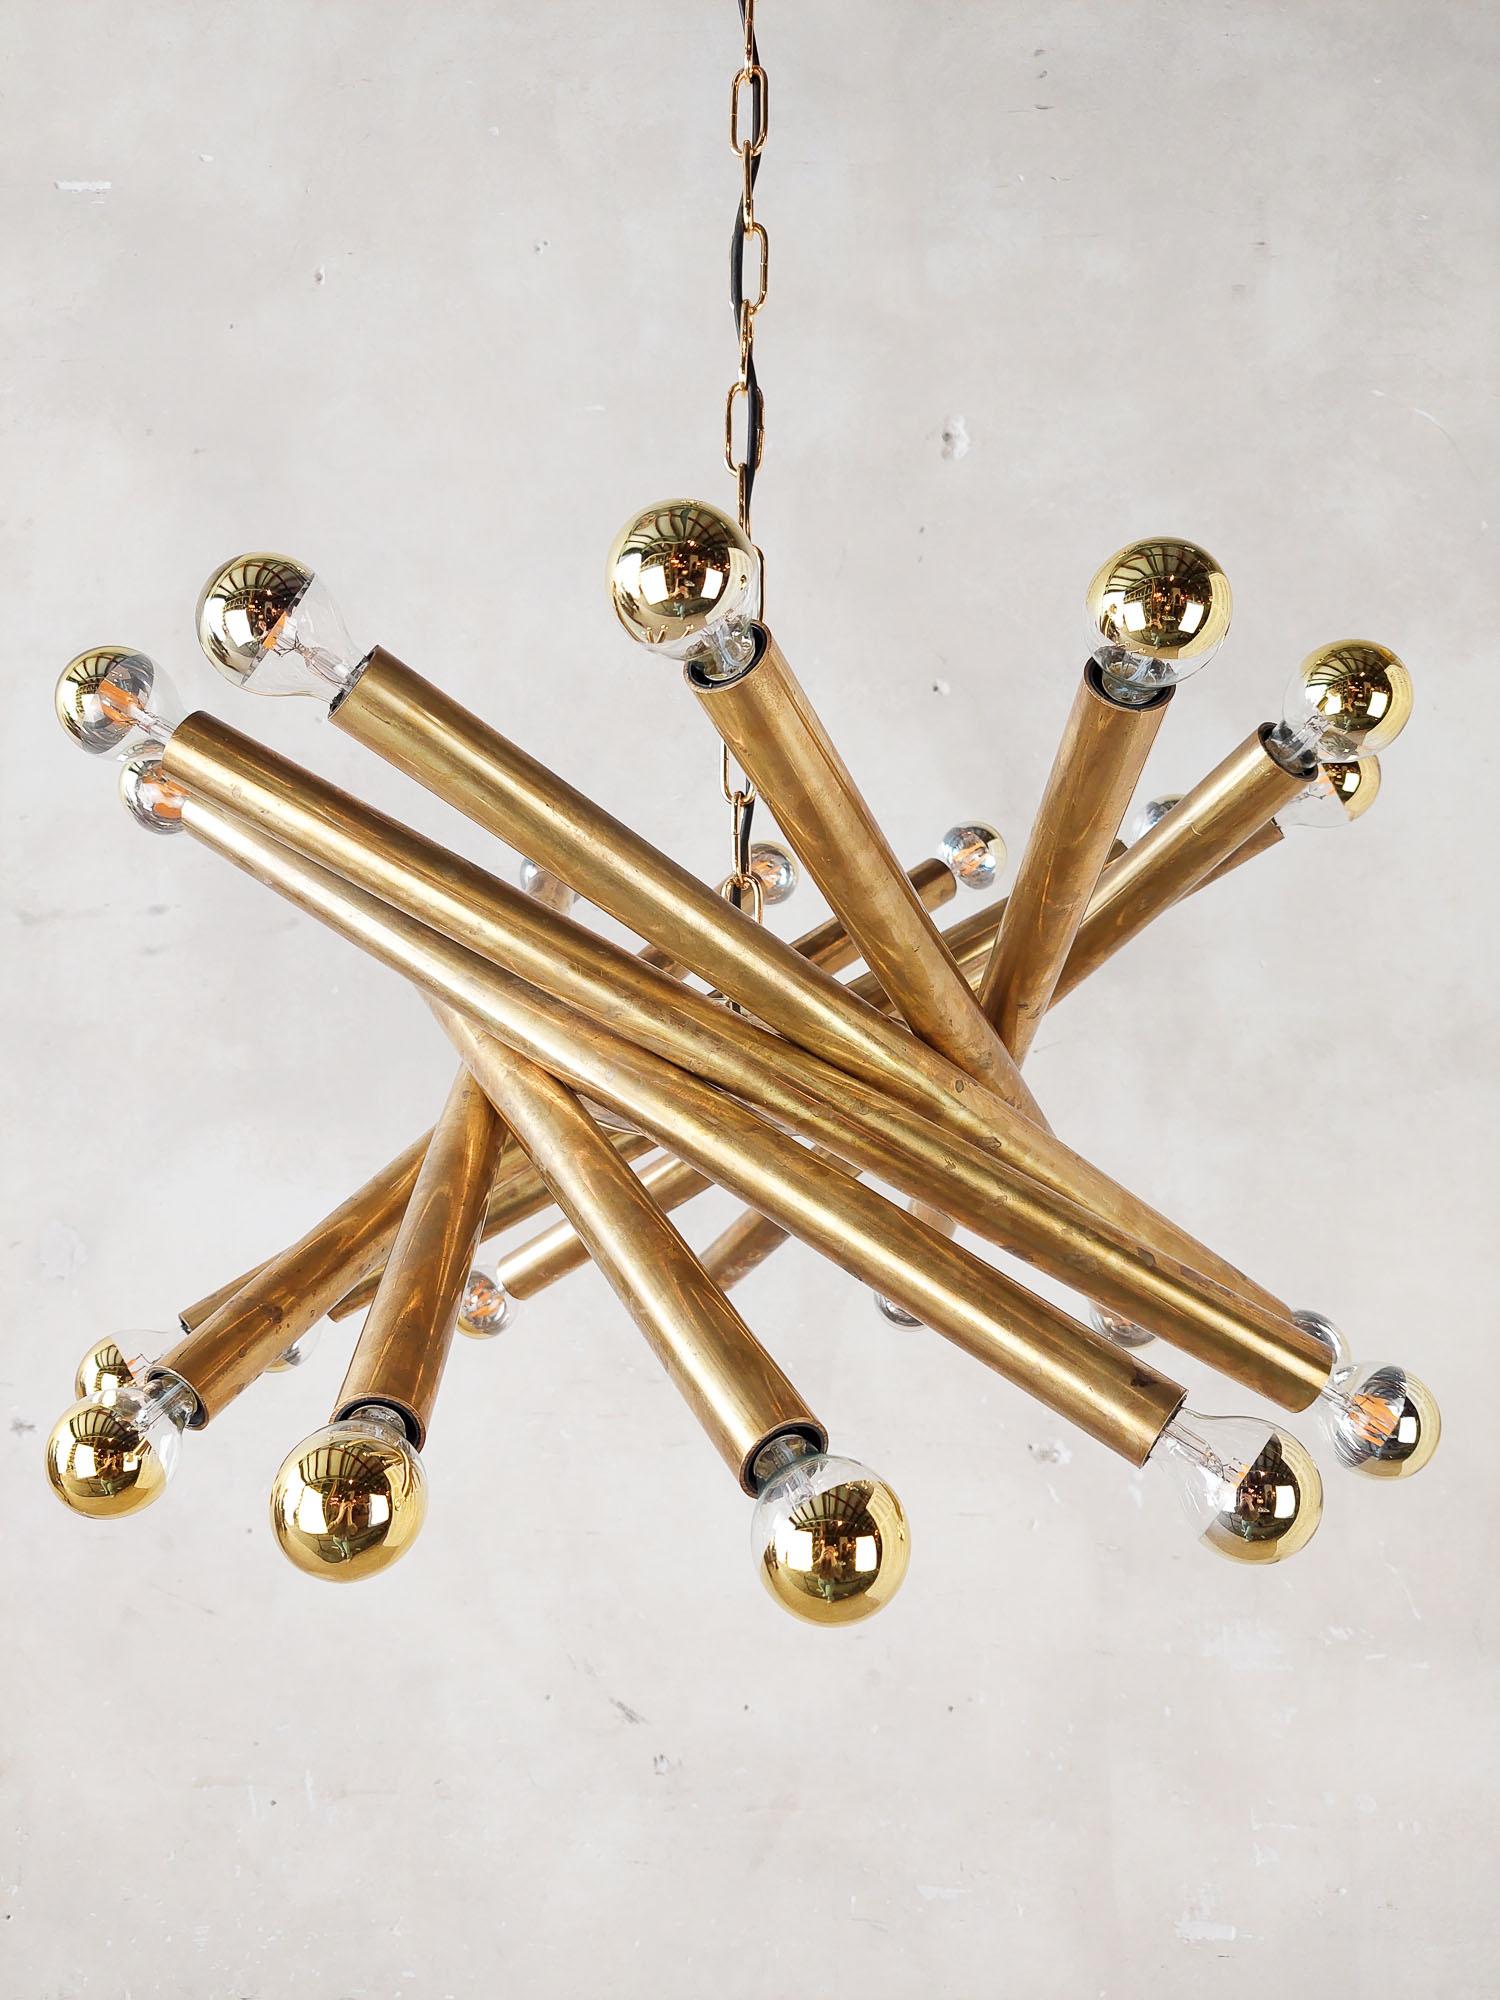 Pair of Midcentury Italian Brass Pendant Lamps by Stilnovo from the 1950s For Sale 2